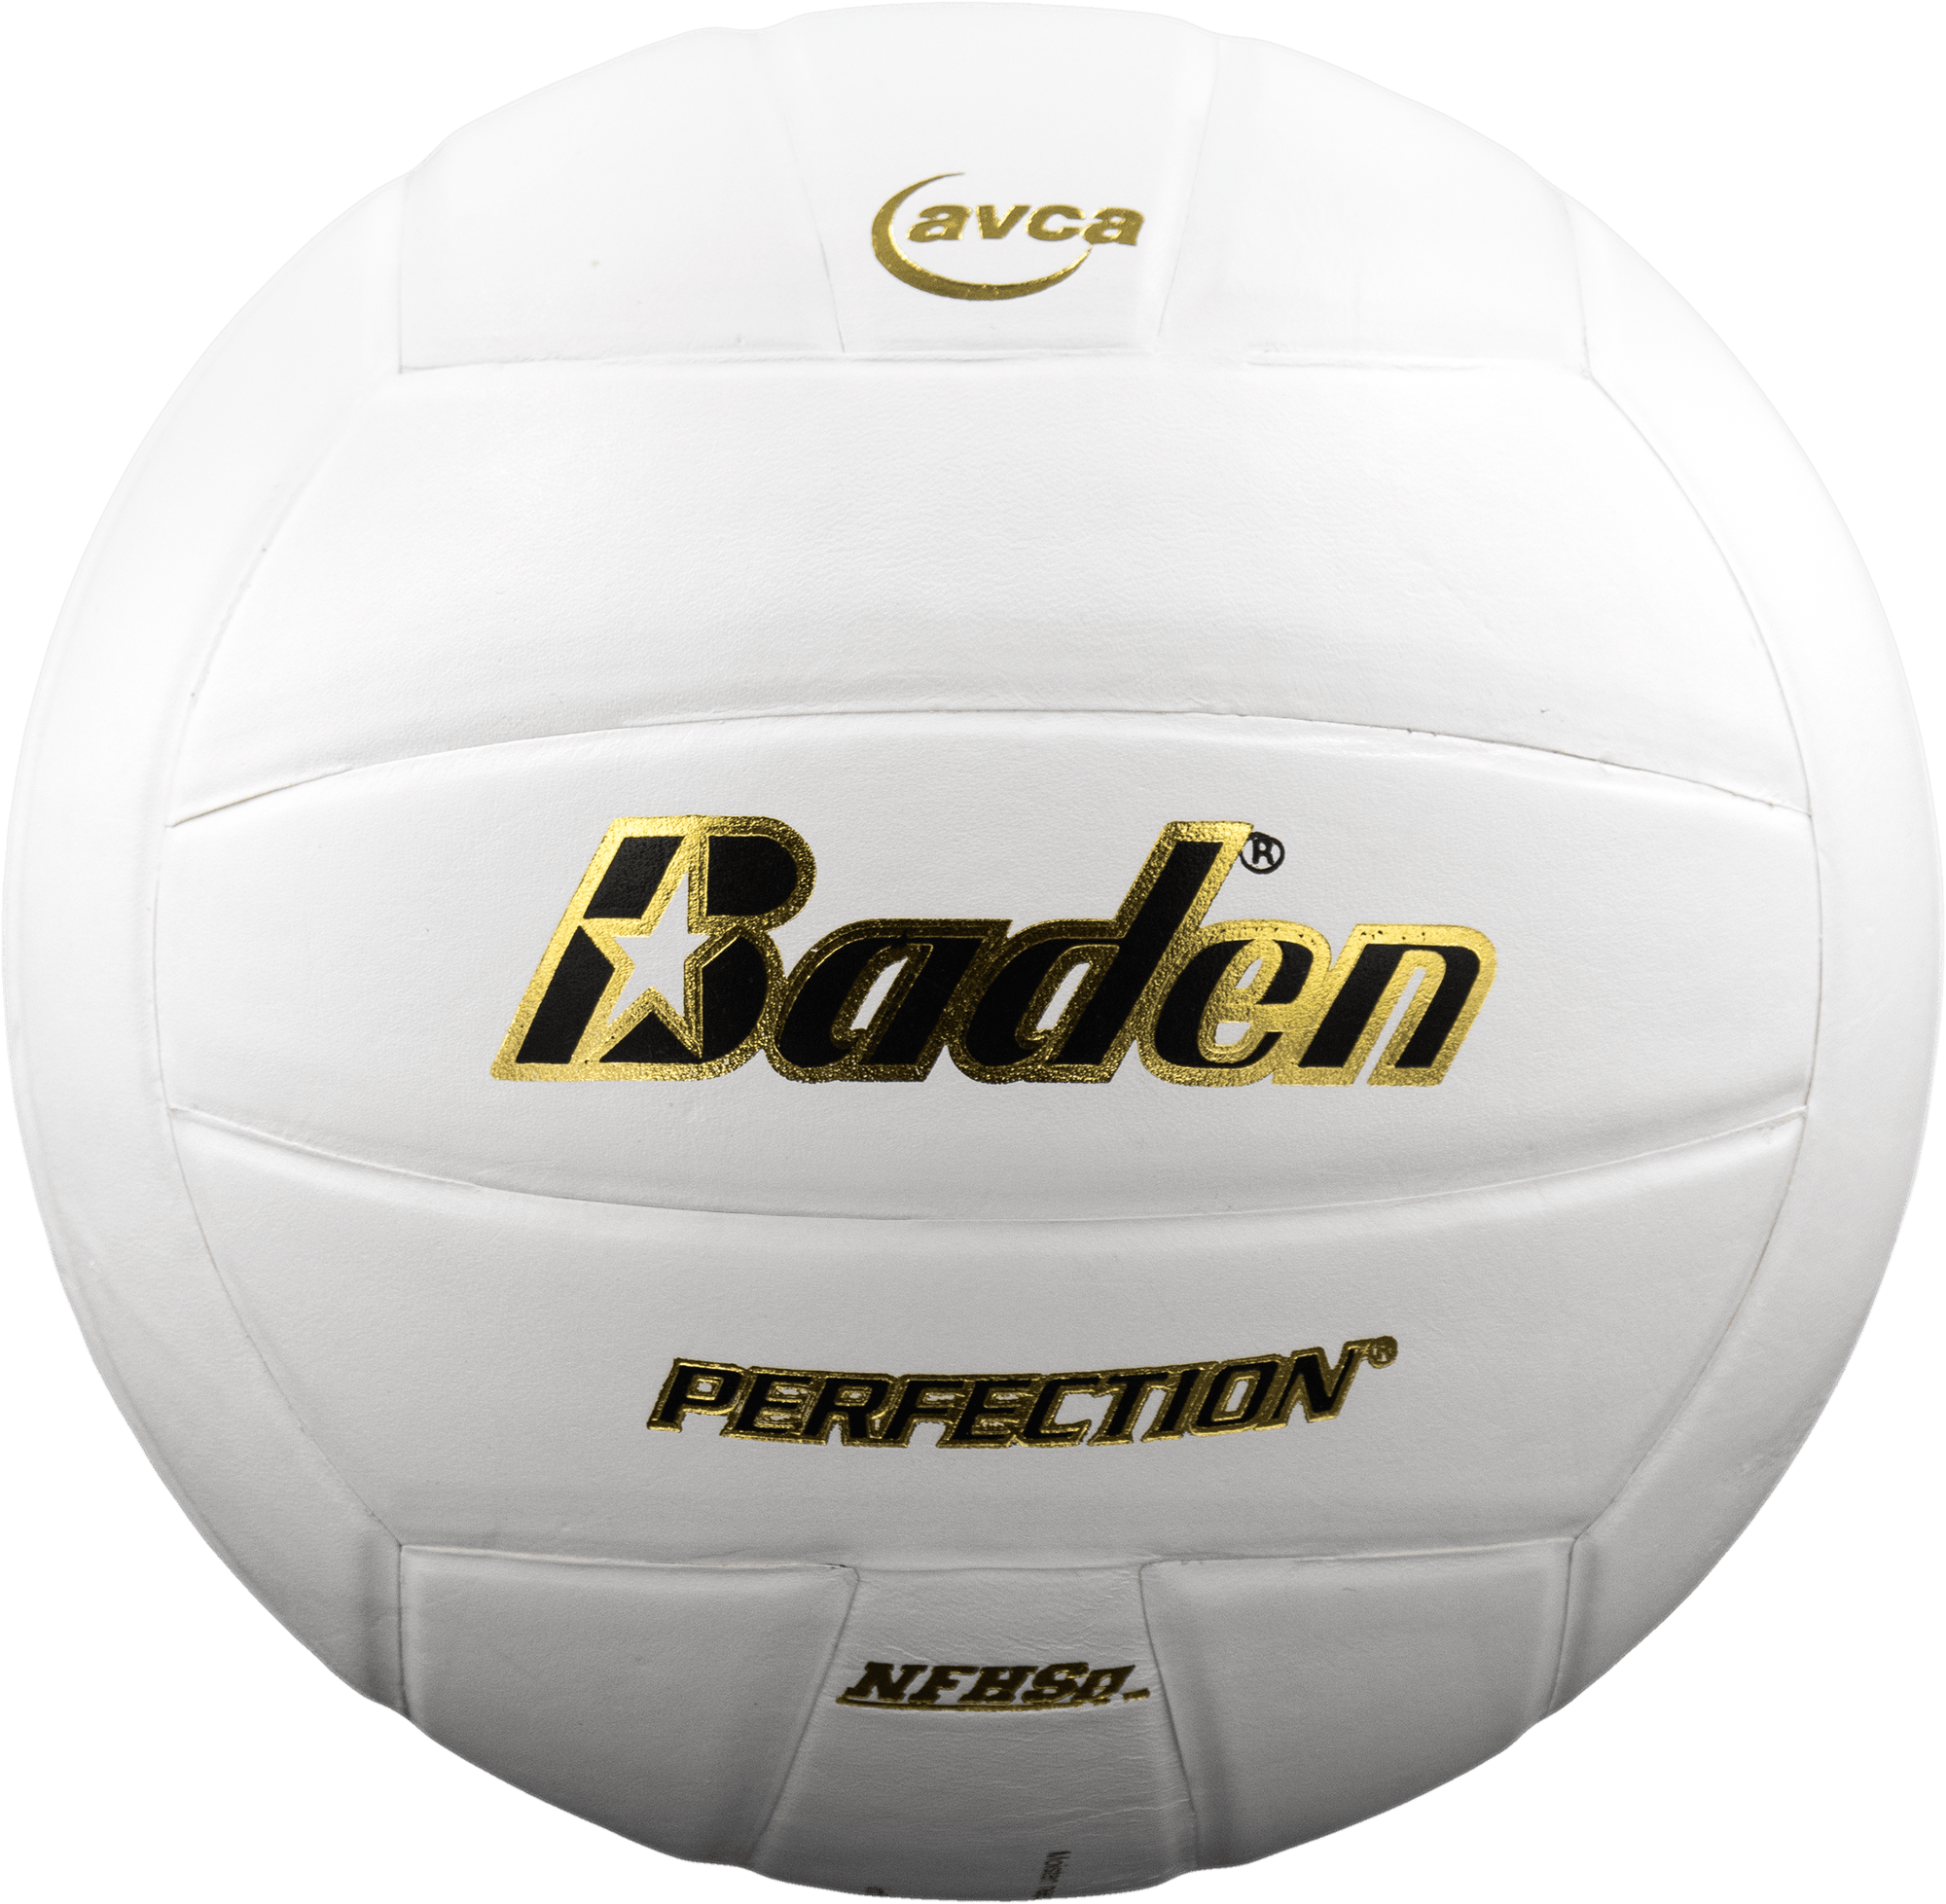 Perfection Leather Volleyball / VX5EC